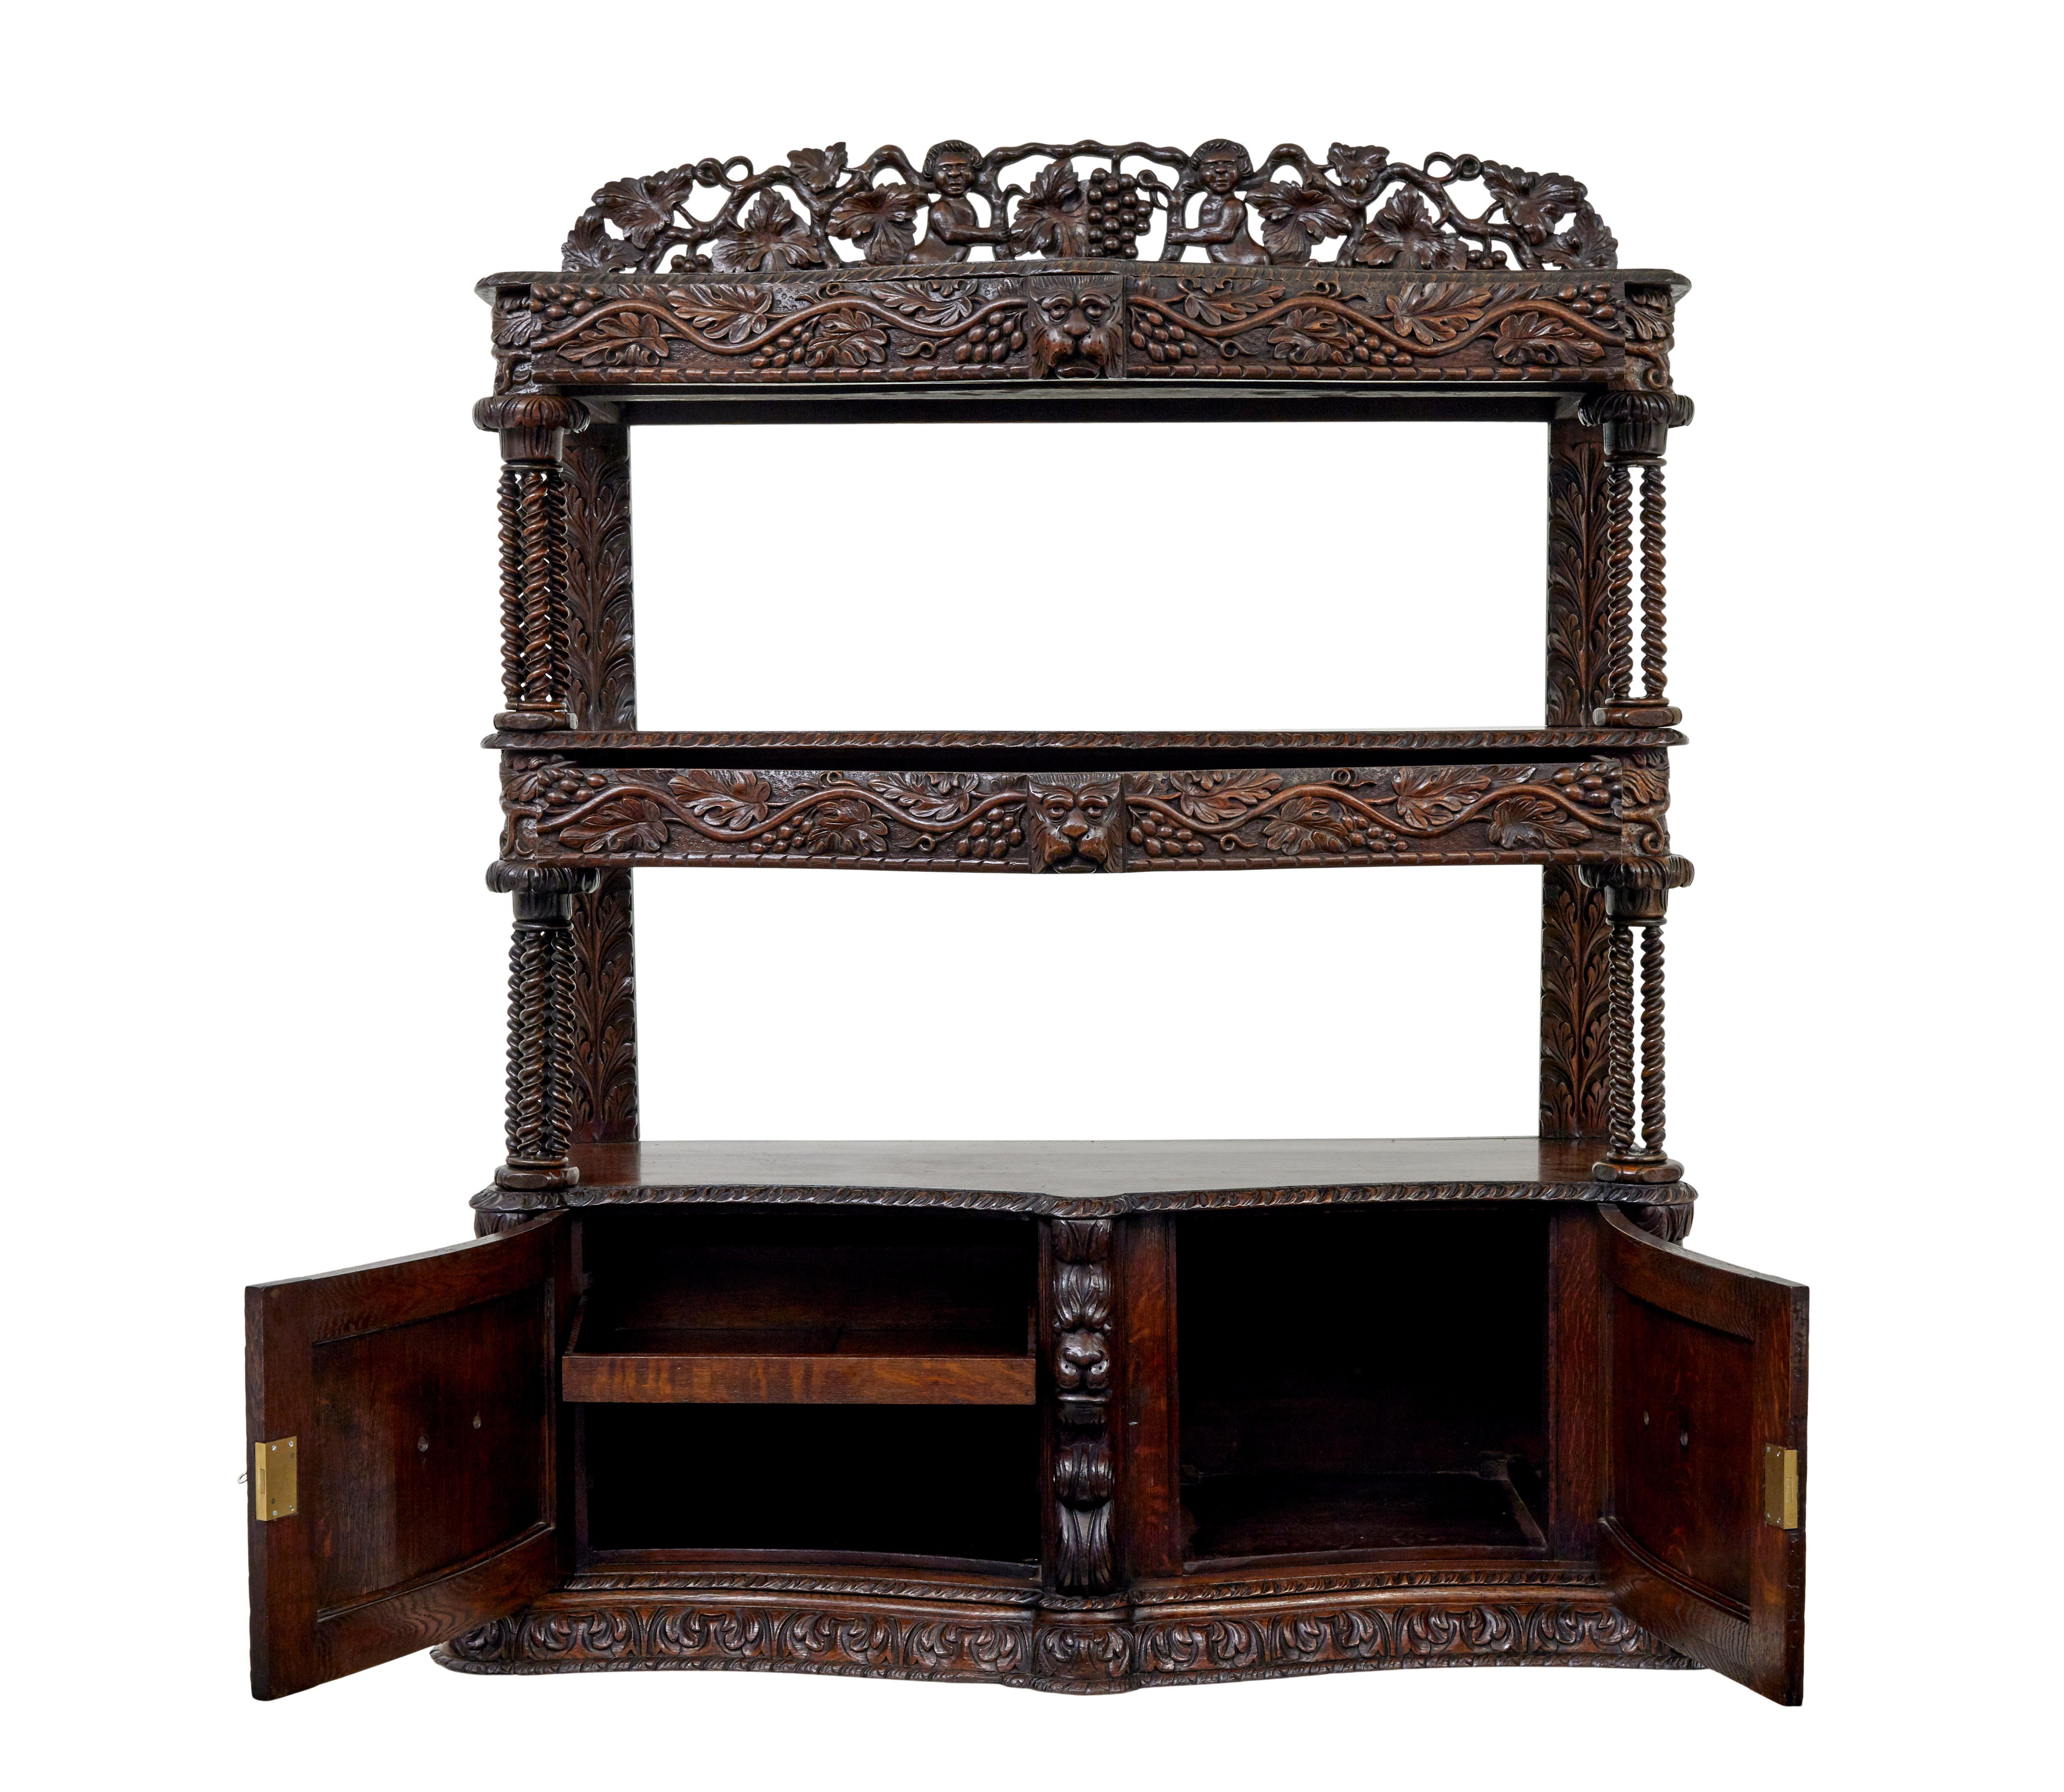 19th century profusely carved Victorian oak buffet circa 1870.

Beautiful quality carved oak buffet, circa 1870. Comprising of 3 tiers, pierced carved gallery above and double door cupboard below. 1 drawer in the top 2 tiers, cupboard below opens to